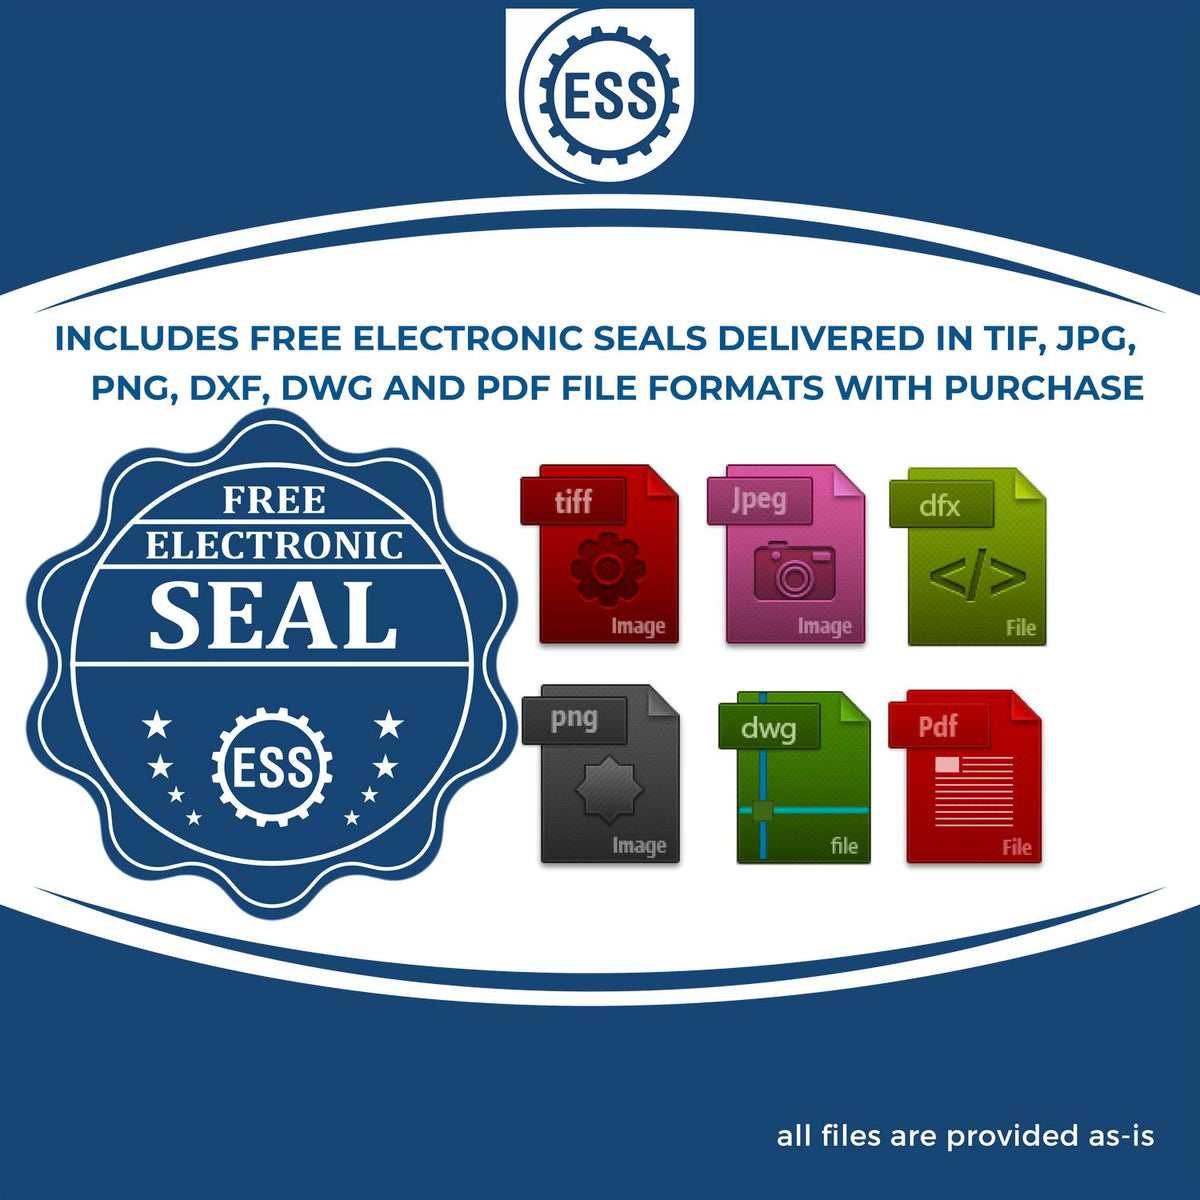 An infographic for the free electronic seal for the Slim Pre-Inked Alaska Architect Seal Stamp illustrating the different file type icons such as DXF, DWG, TIF, JPG and PNG.